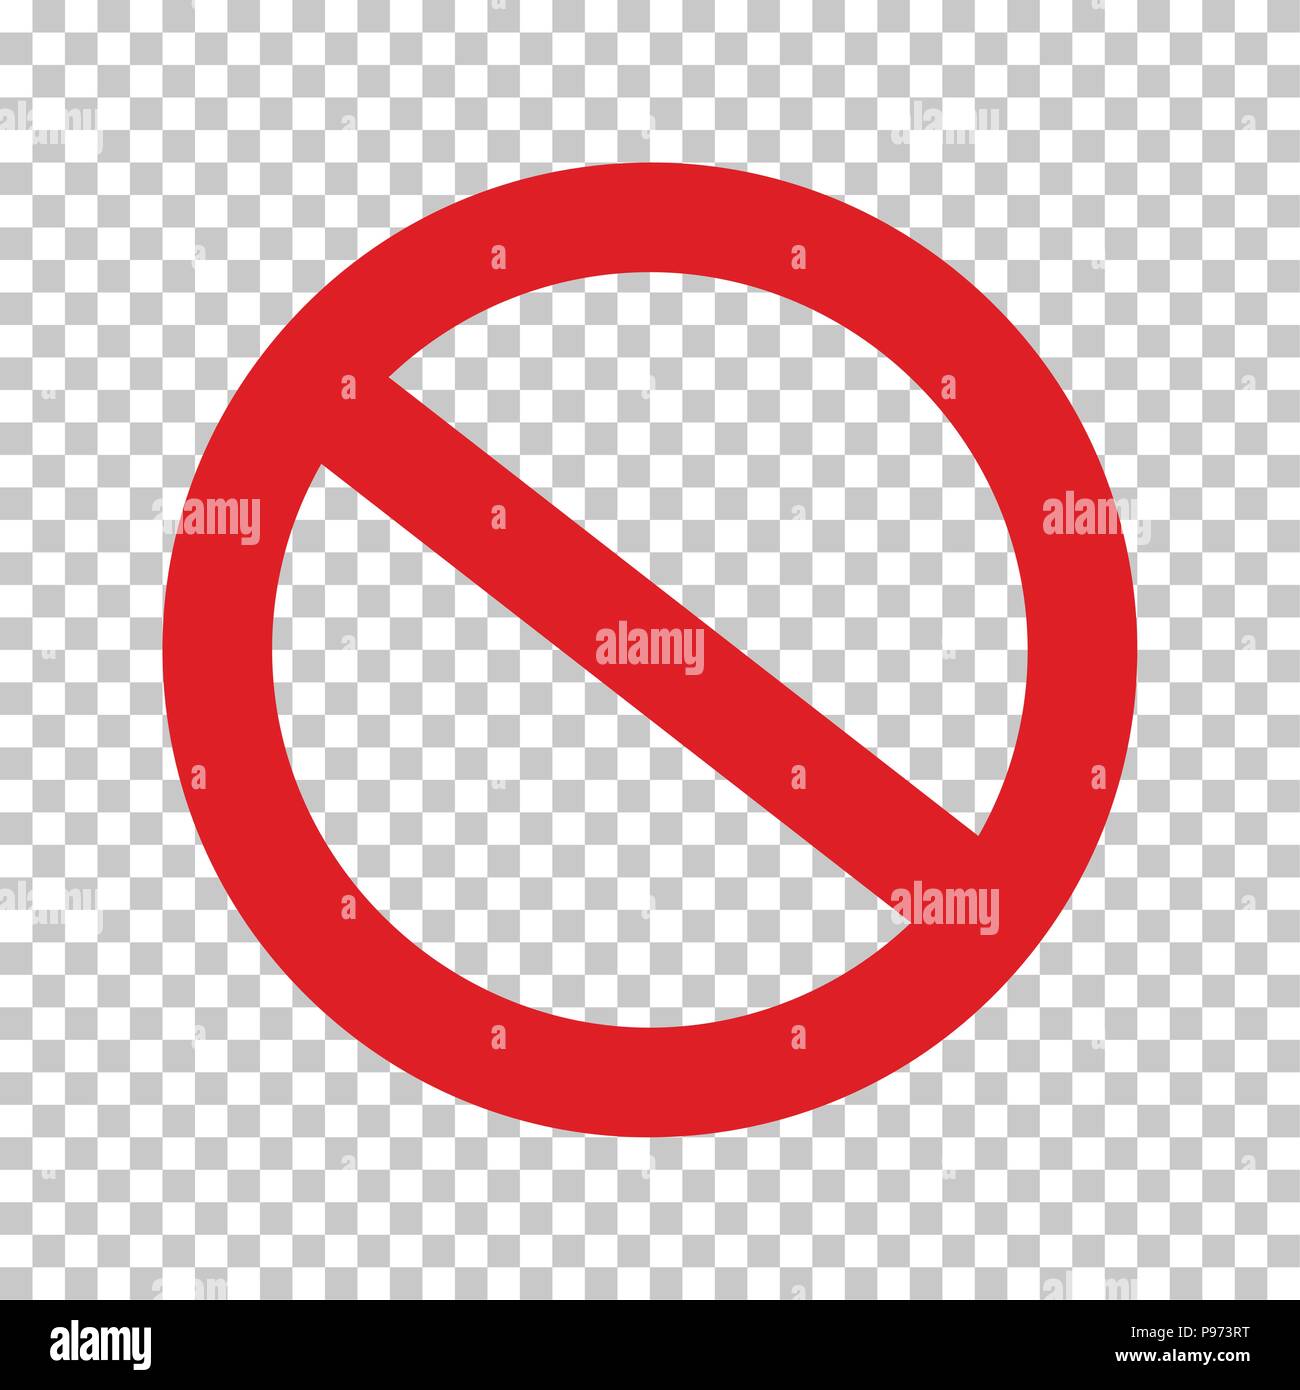 Empty NO symbol, prohibition or forbidden sign; crossed out red circle. Vector icon isolated on transparent background. Stock Vector